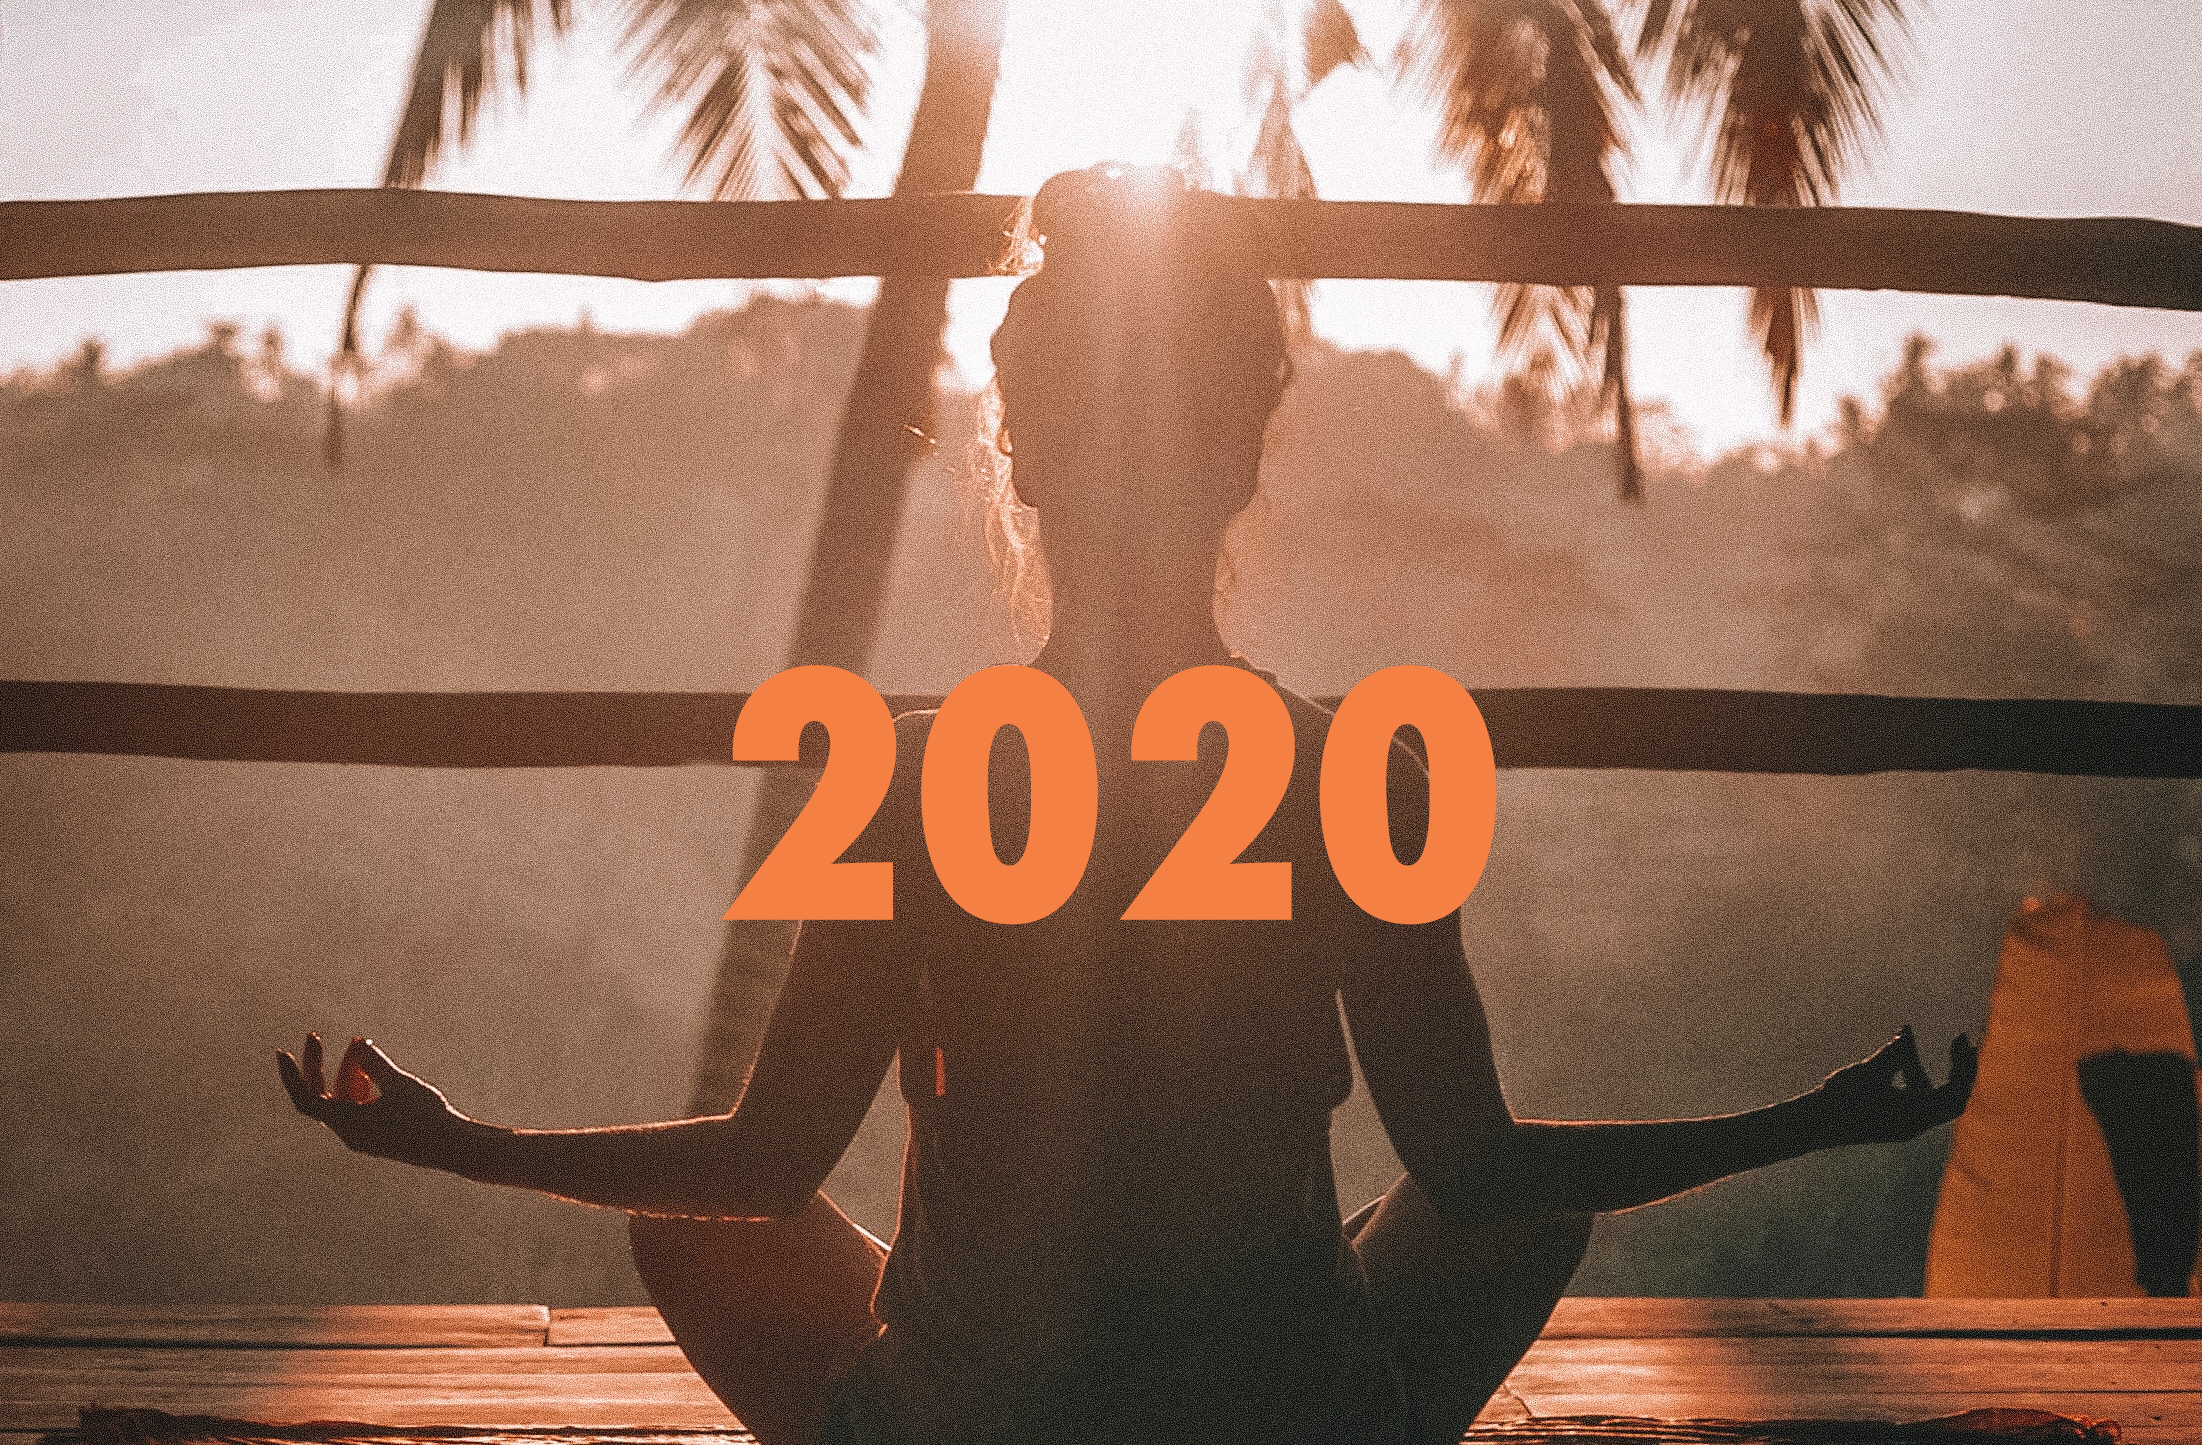 2020 Vision – 10 Travel Trends to Look Out for in the New Decade